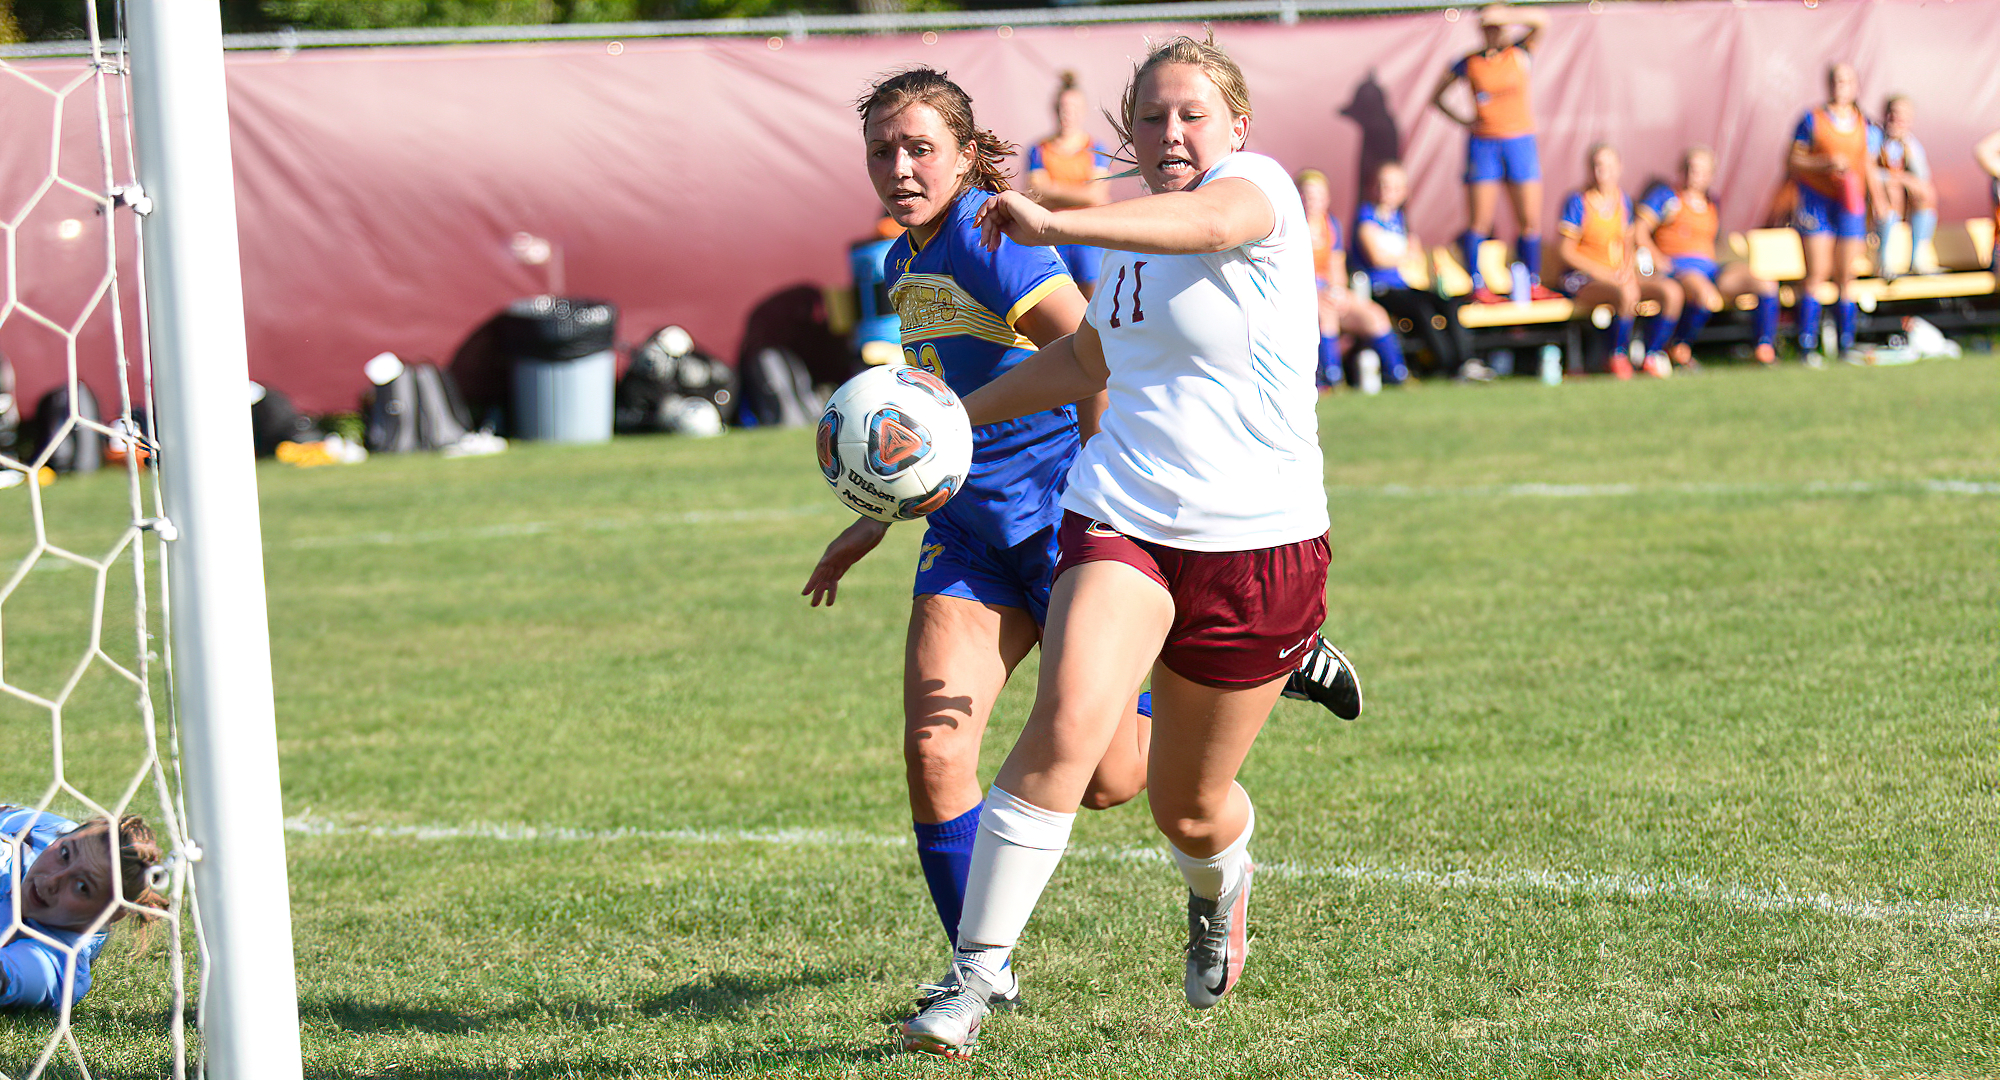 Sophomore Lindsey Hildenbrand scored the game-winning goal in overtime in the Cobbers' 1-0 victory over Bethel in Arden Hills.